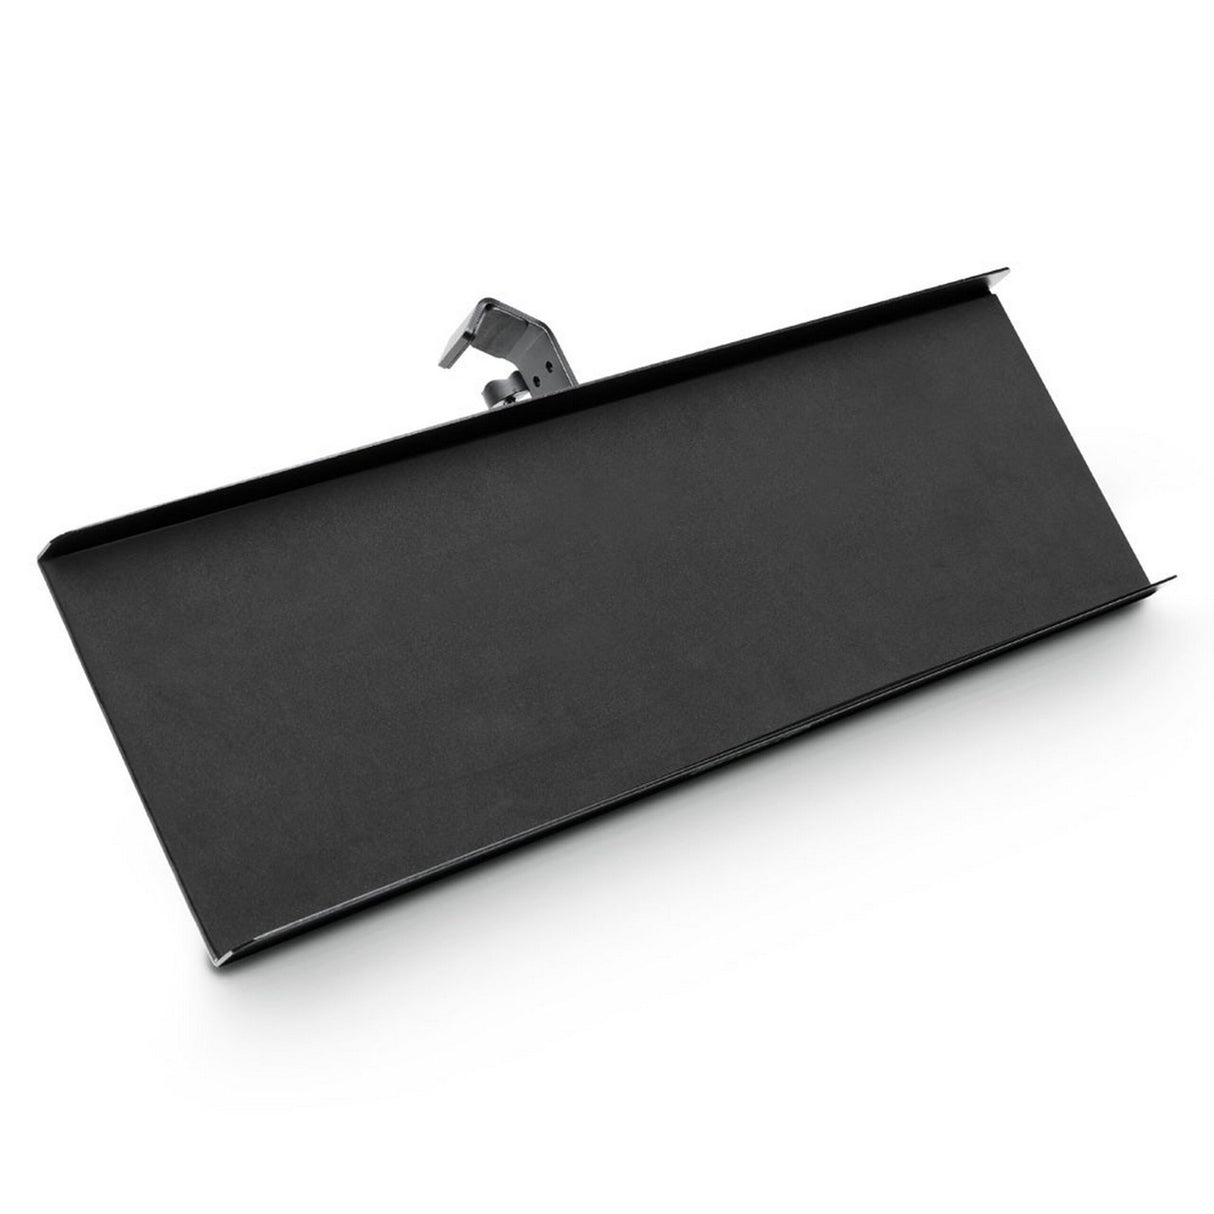 Gravity MA TRAY 2 Microphone Stand Tray 400mm x 130mm